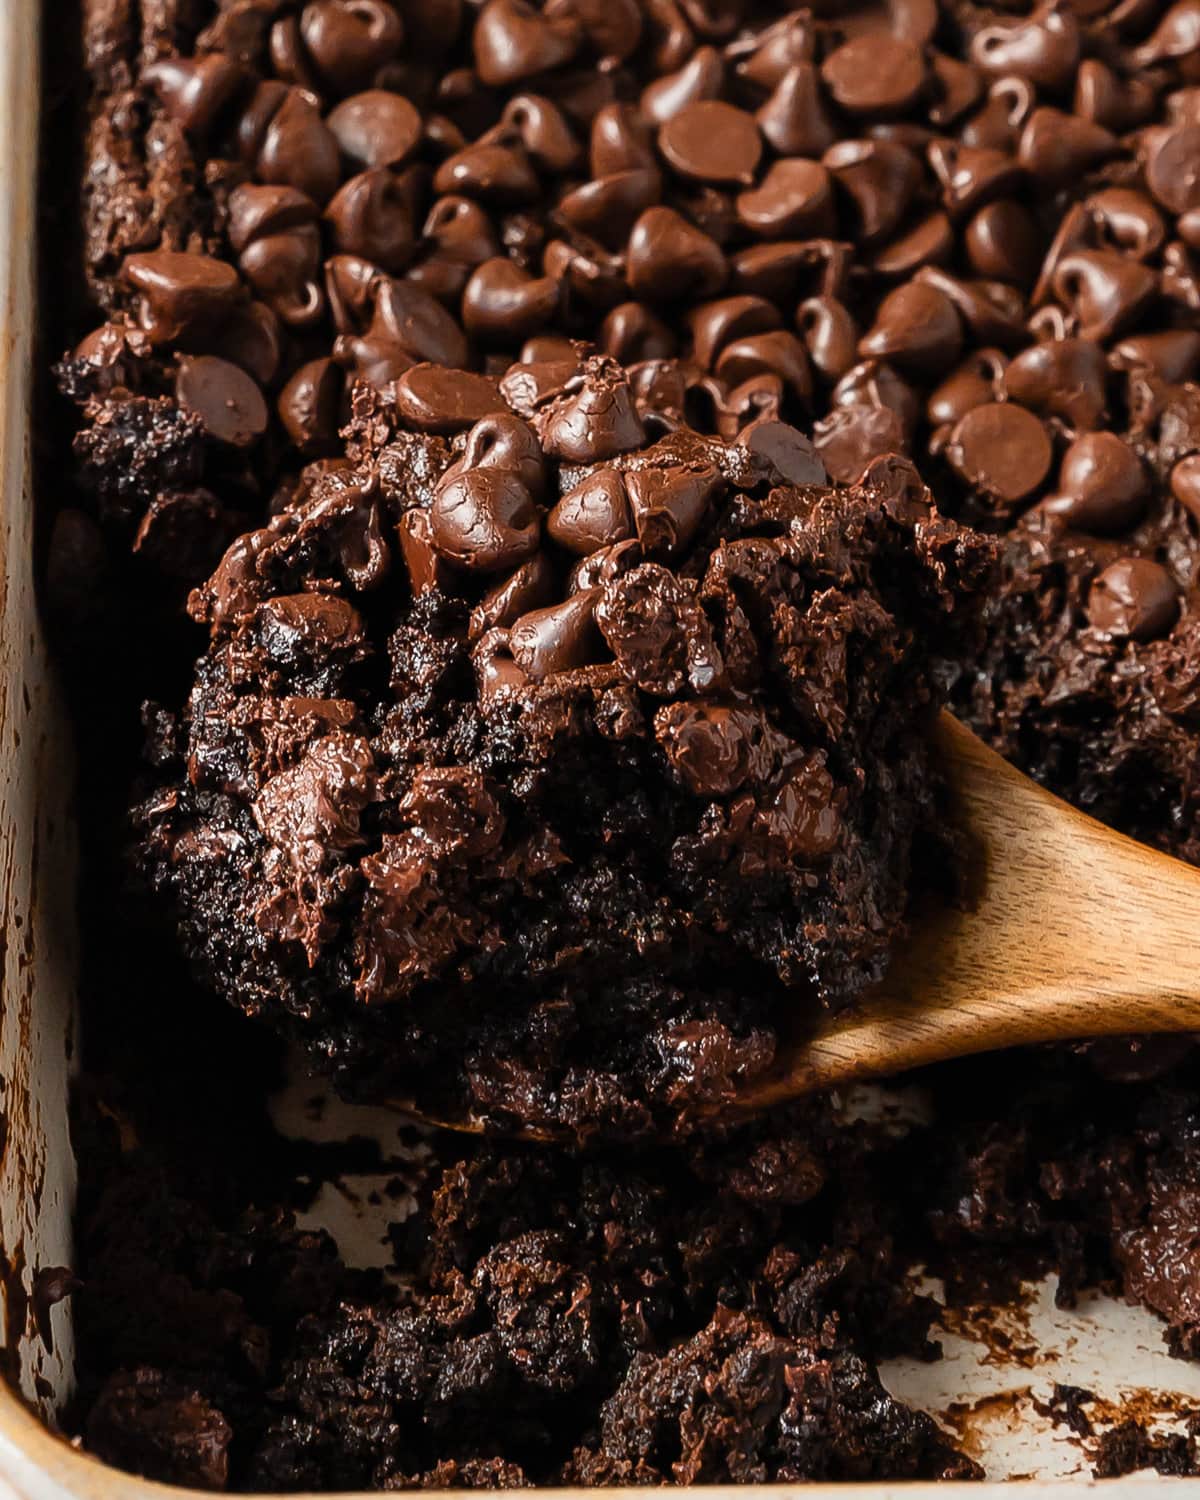 Chocolate dump cake is a quick, easy to make and rich chocolate dessert. This chocolate dump cake recipe is made from moist chocolate cake mix, creamy chocolate pudding and sweet chocolate chips. Top this decadent chocolate pudding dump cake with cold vanilla ice cream for the perfect dessert. 